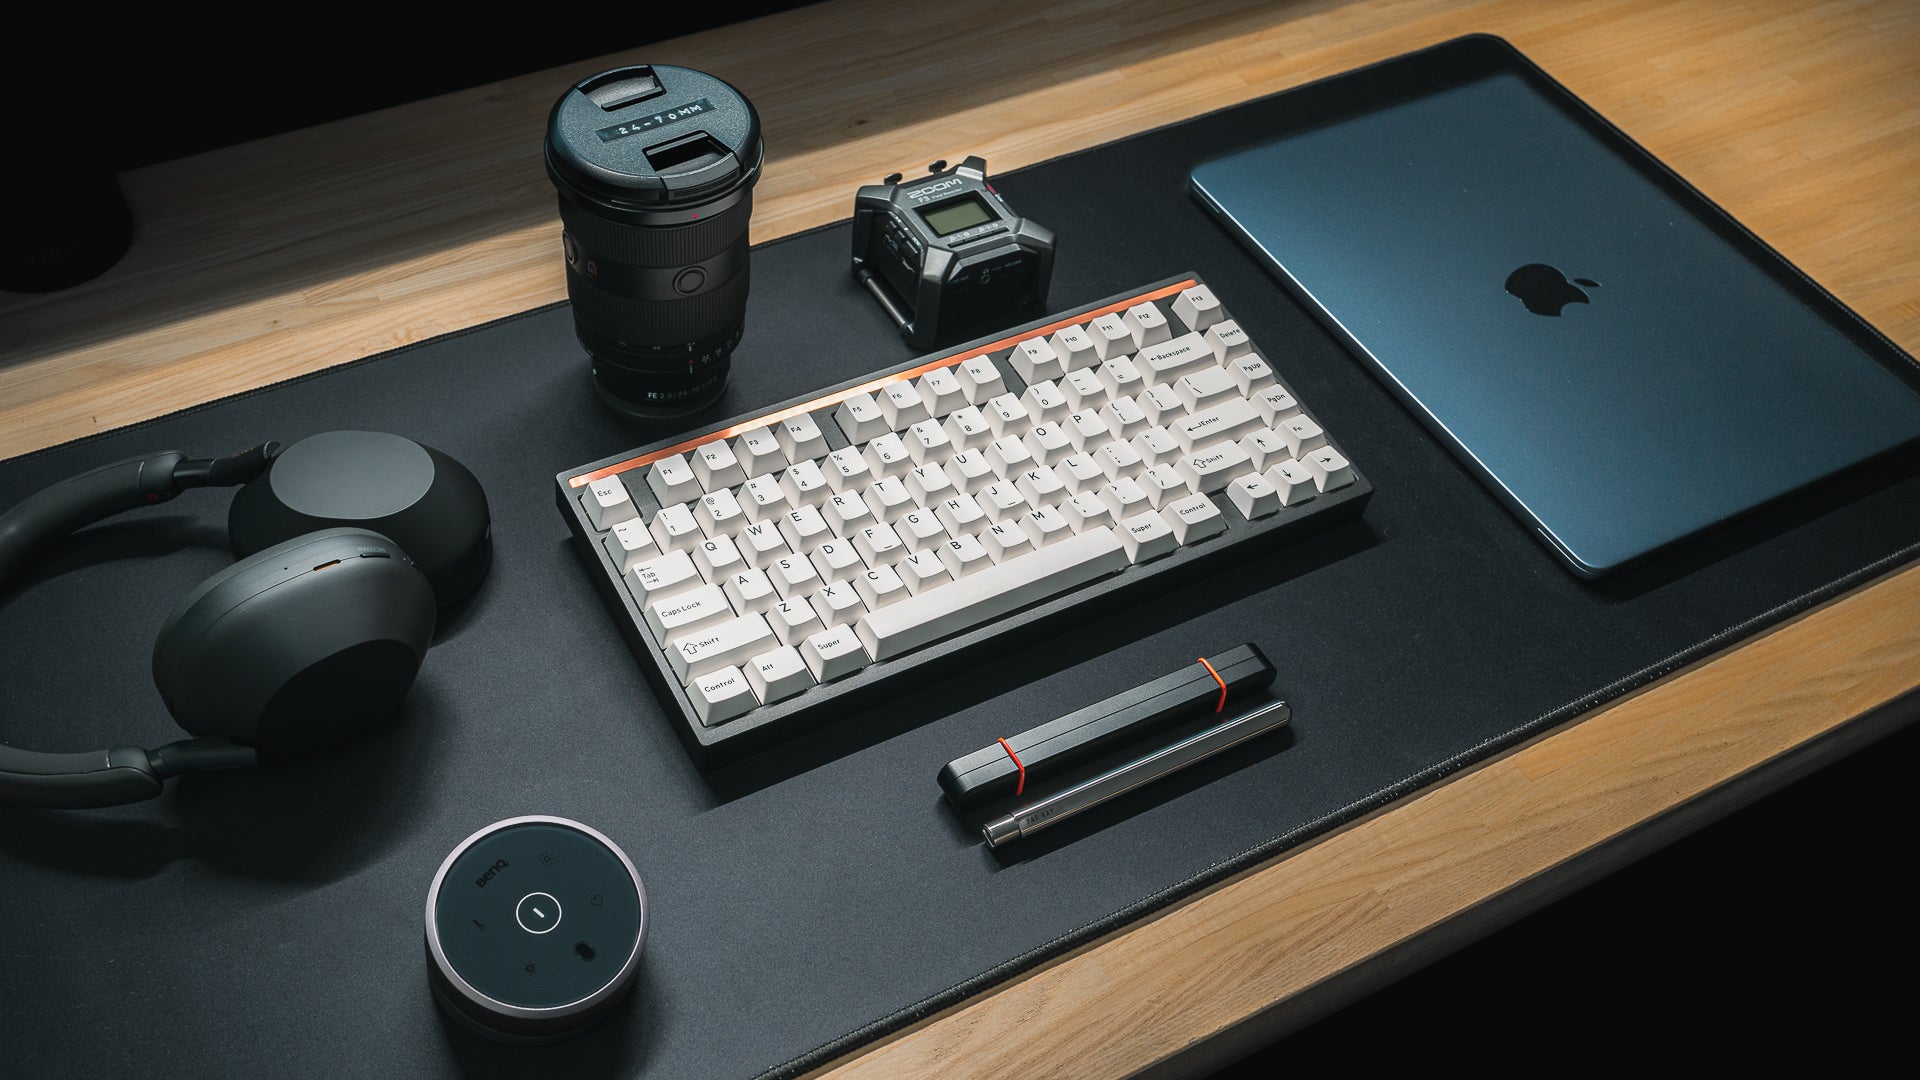 My favourite tech and desk accessories this year